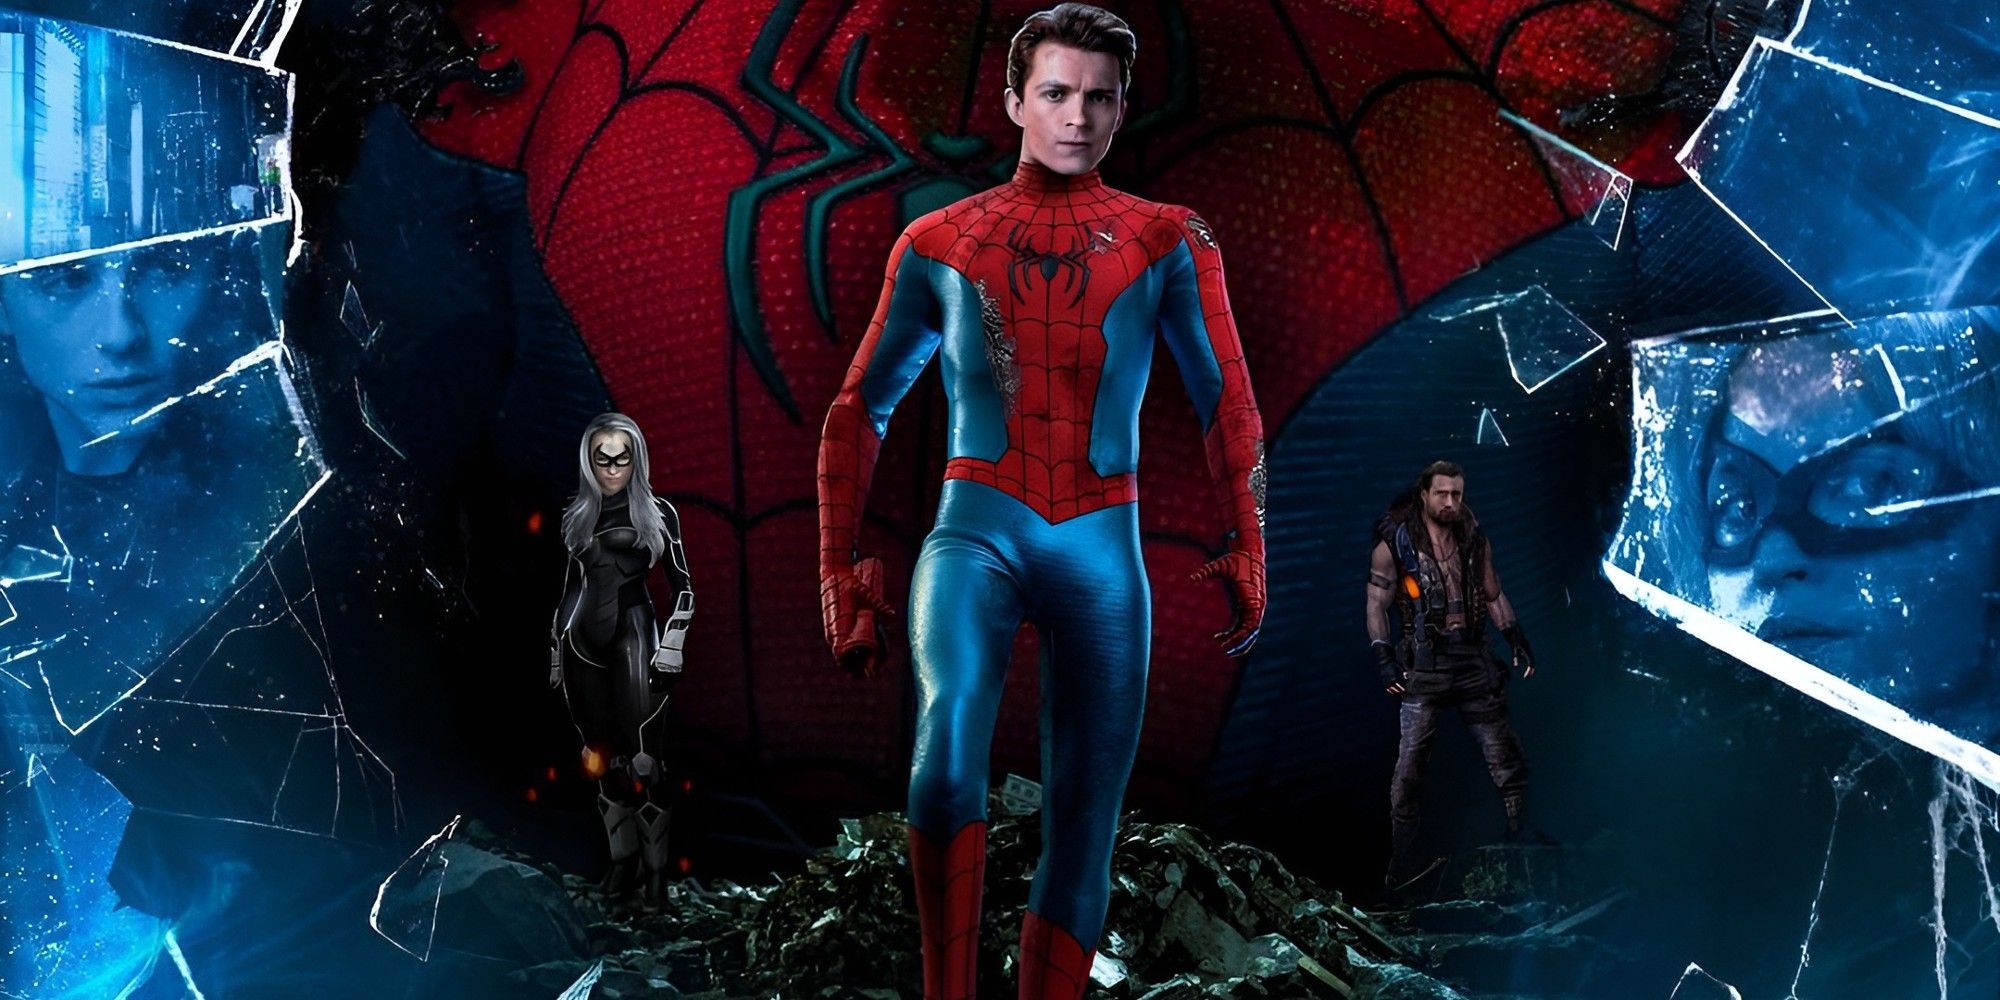 Spider-Man 4 fan poster with Tom Holland's Spider-Man at the center and Kraven and Black Cat on his sides.